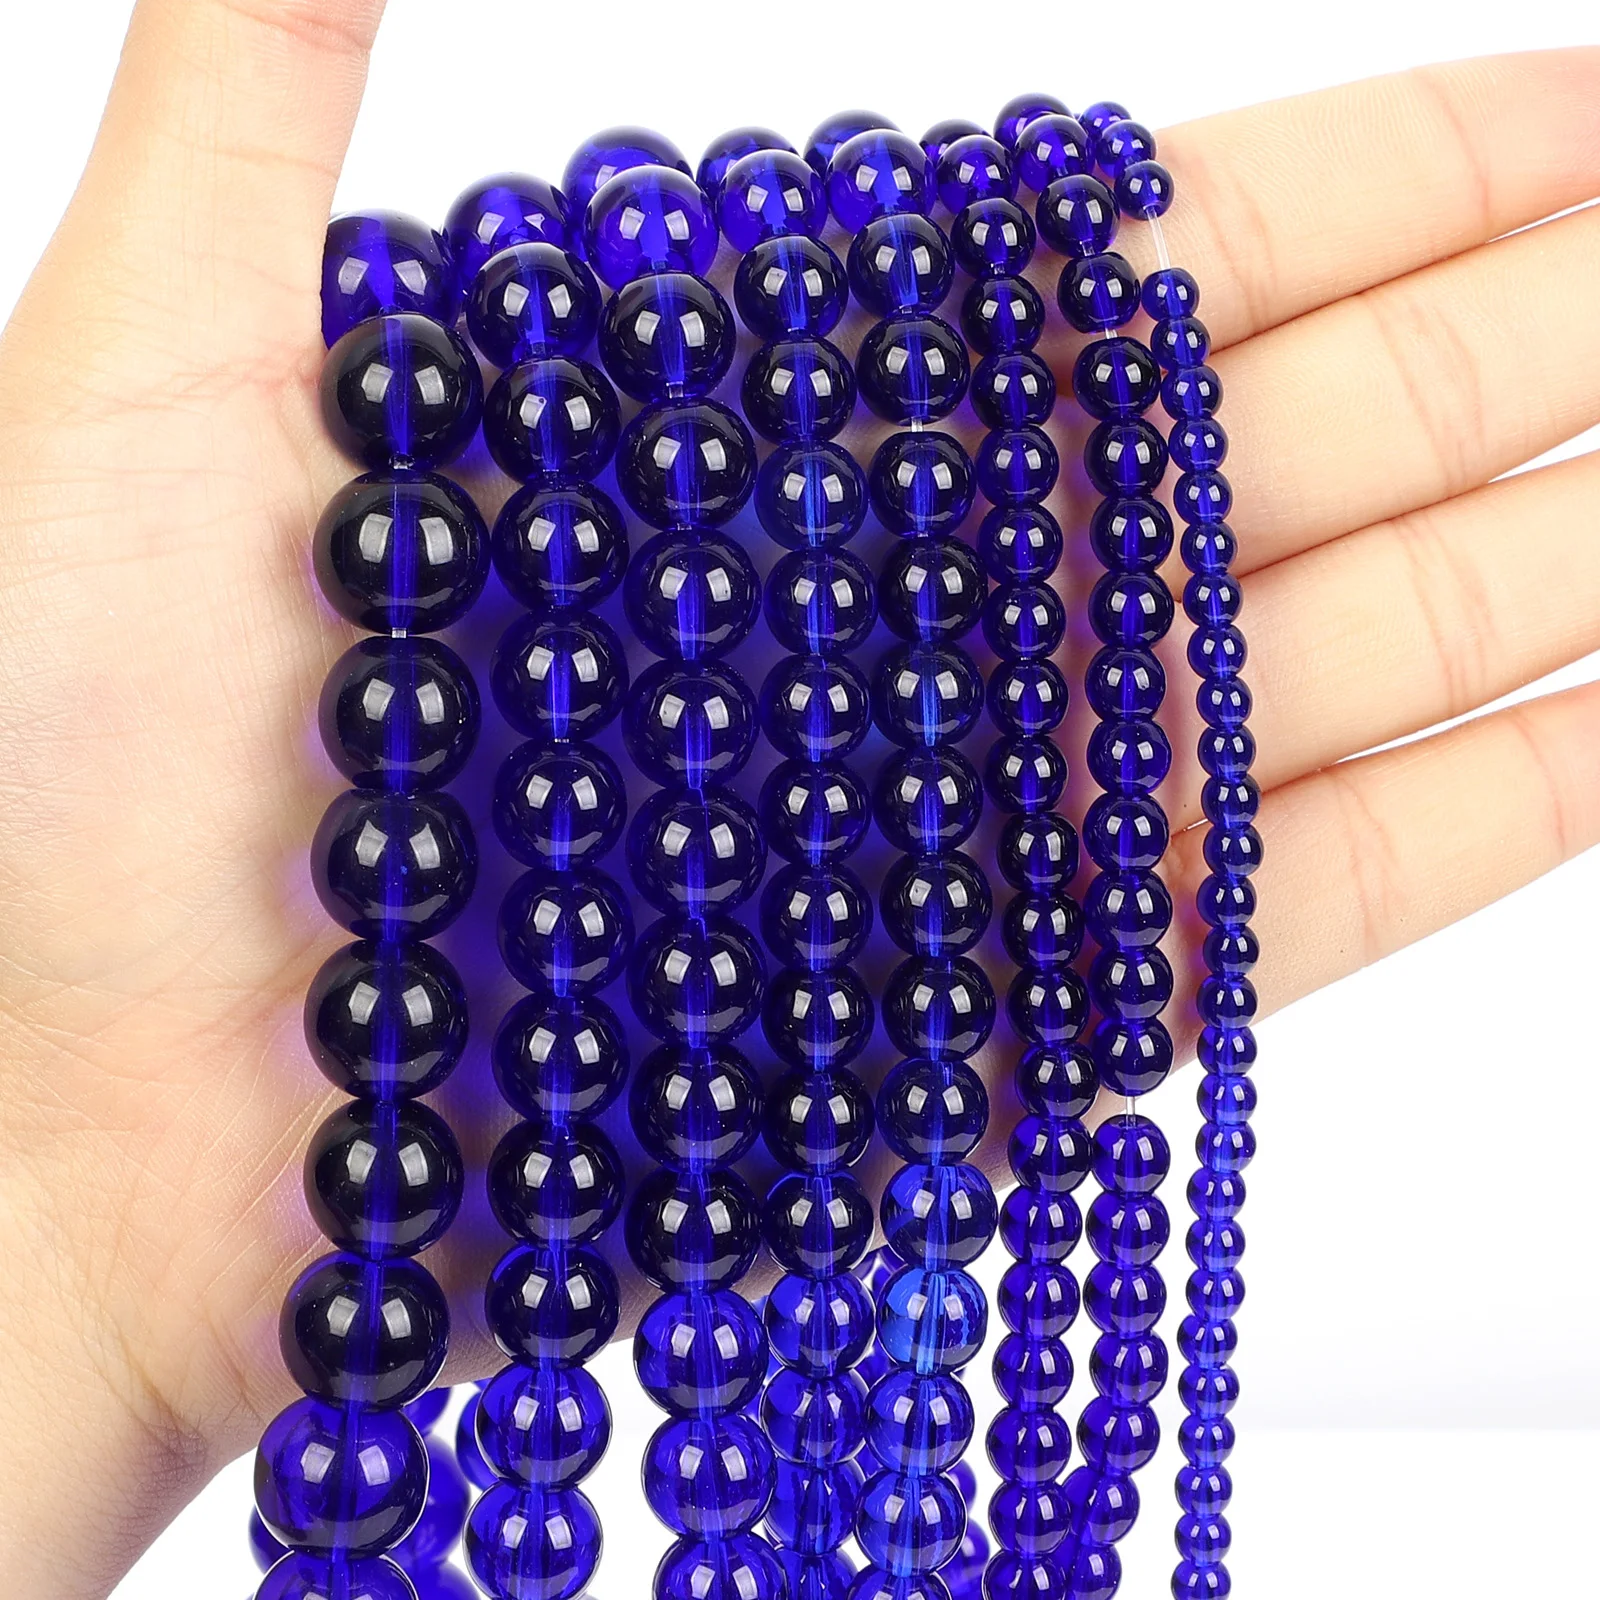 Natural Stone Beads Navy Blue Glass Charm Round Loose Beads for Jewelry Making Needlework Bracelet DIY  4/6/8/10/12 MM